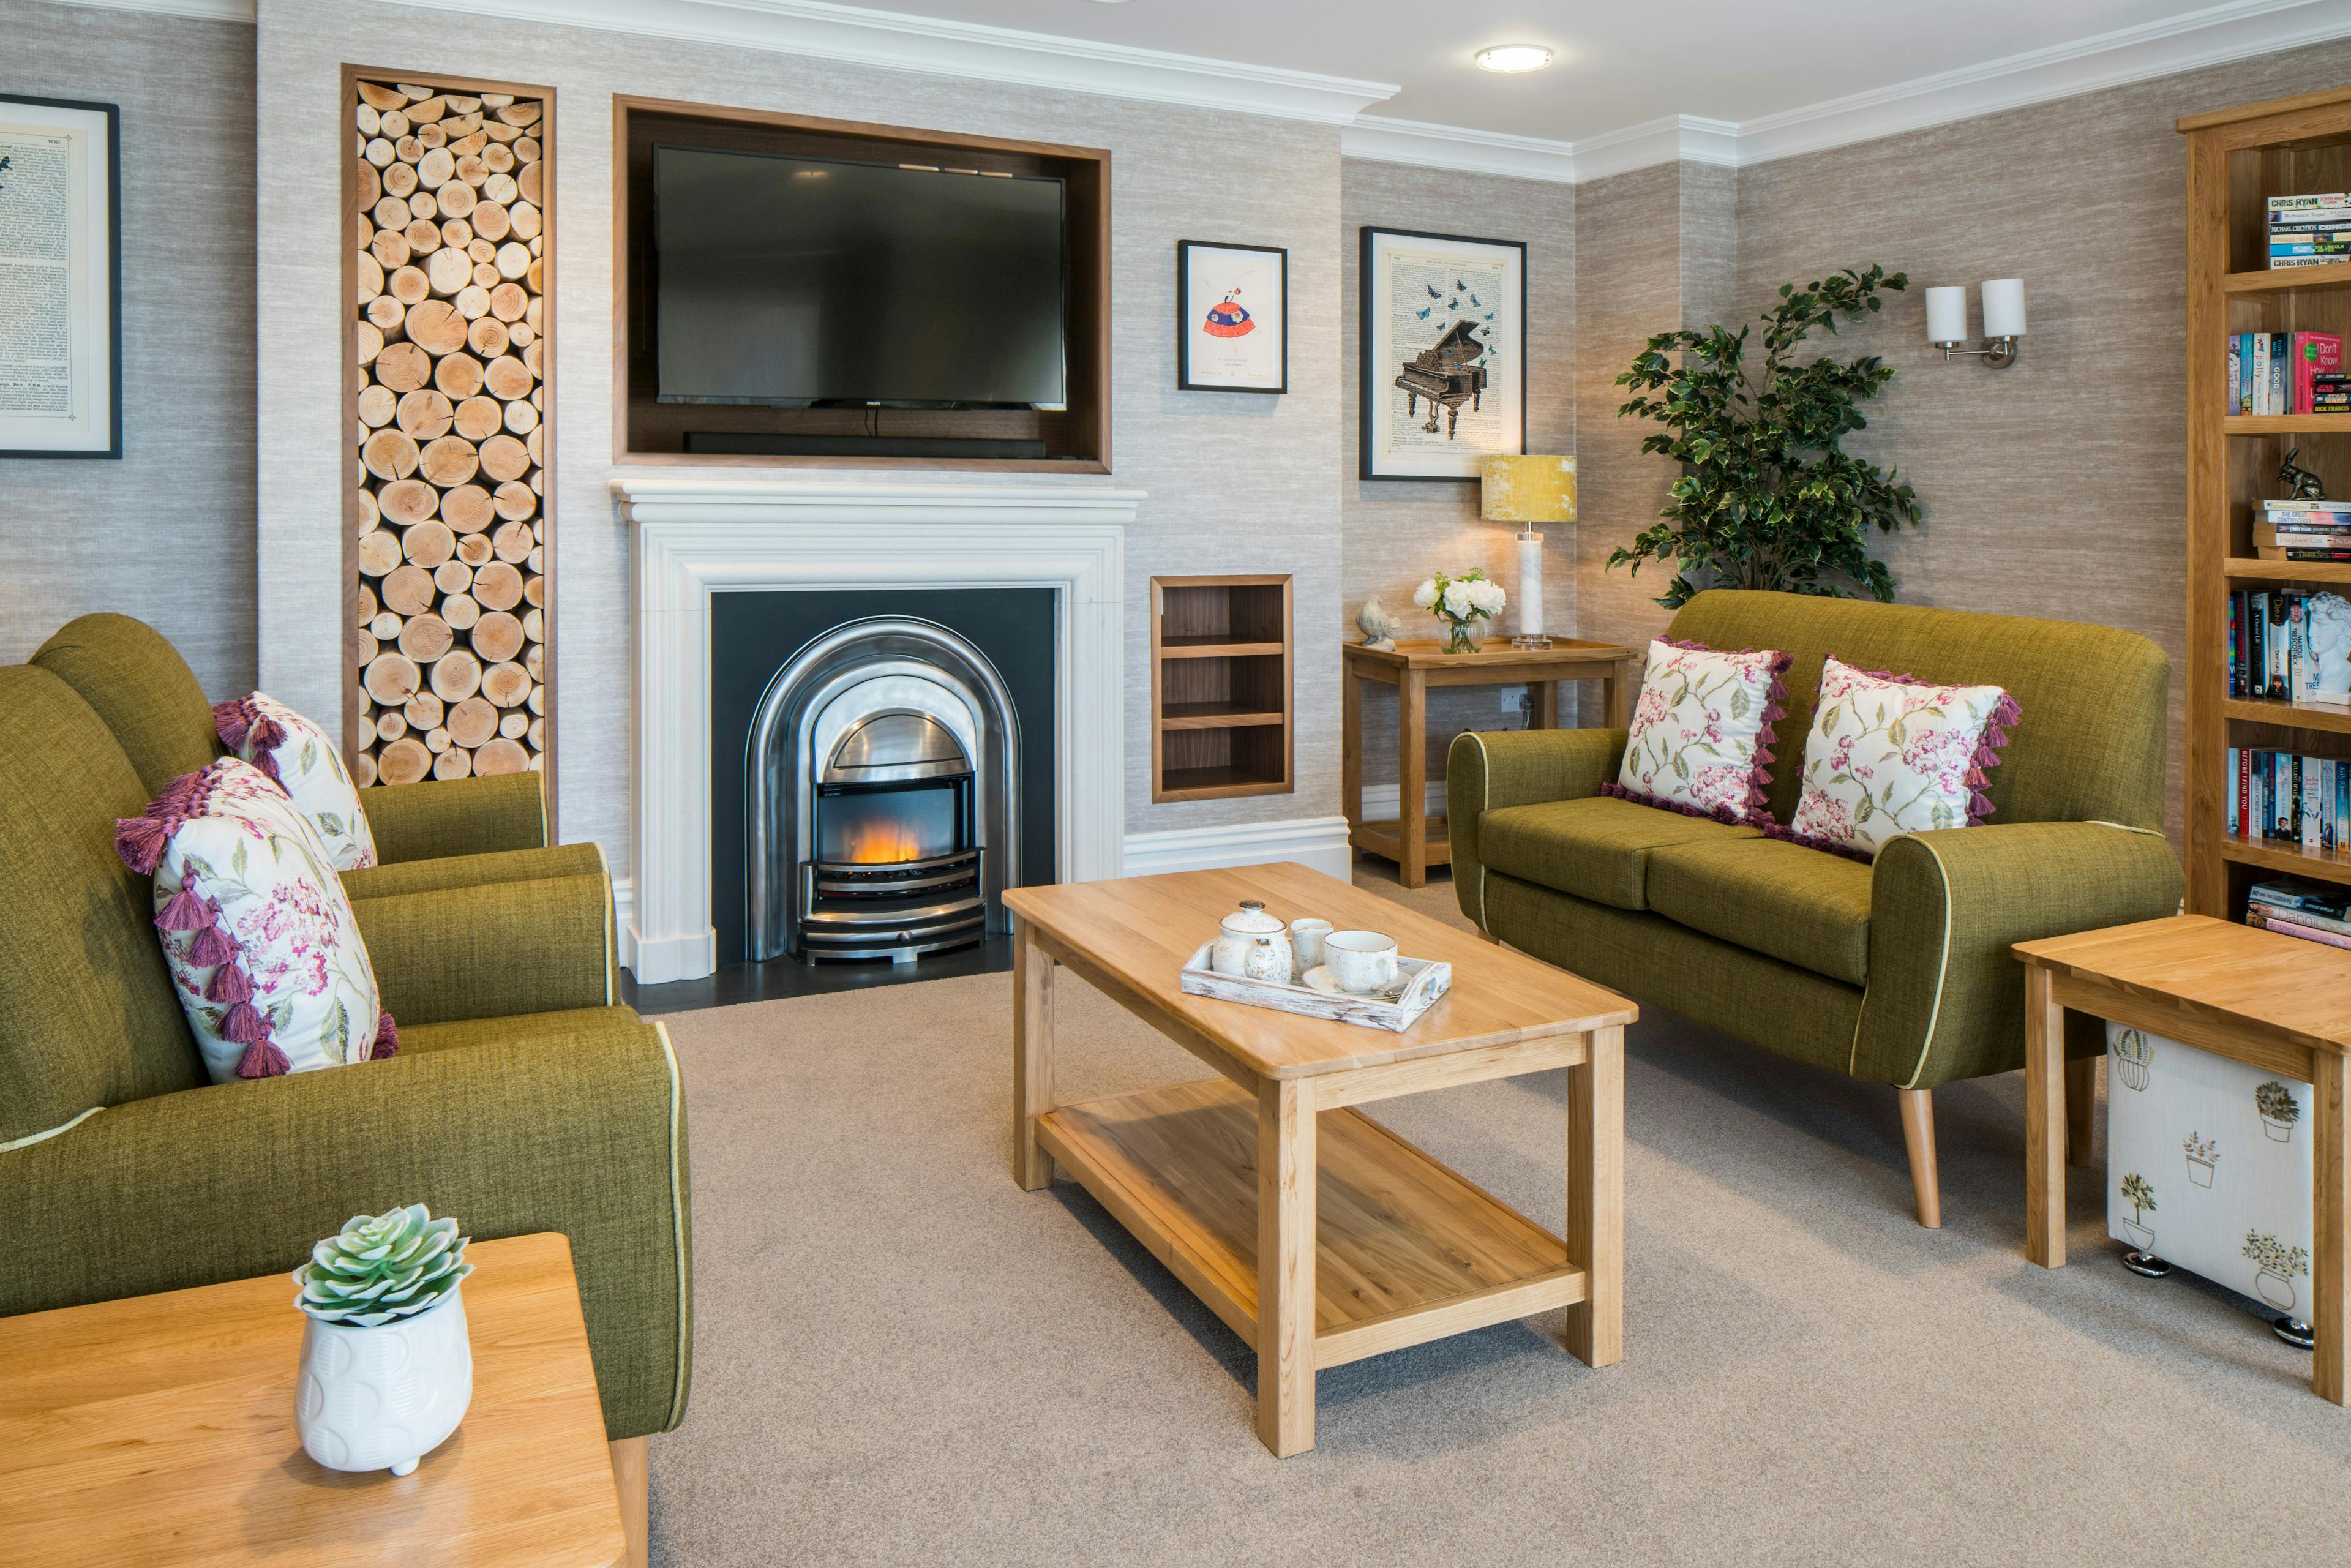 Porthaven Care Homes - Upton Mill care home 16